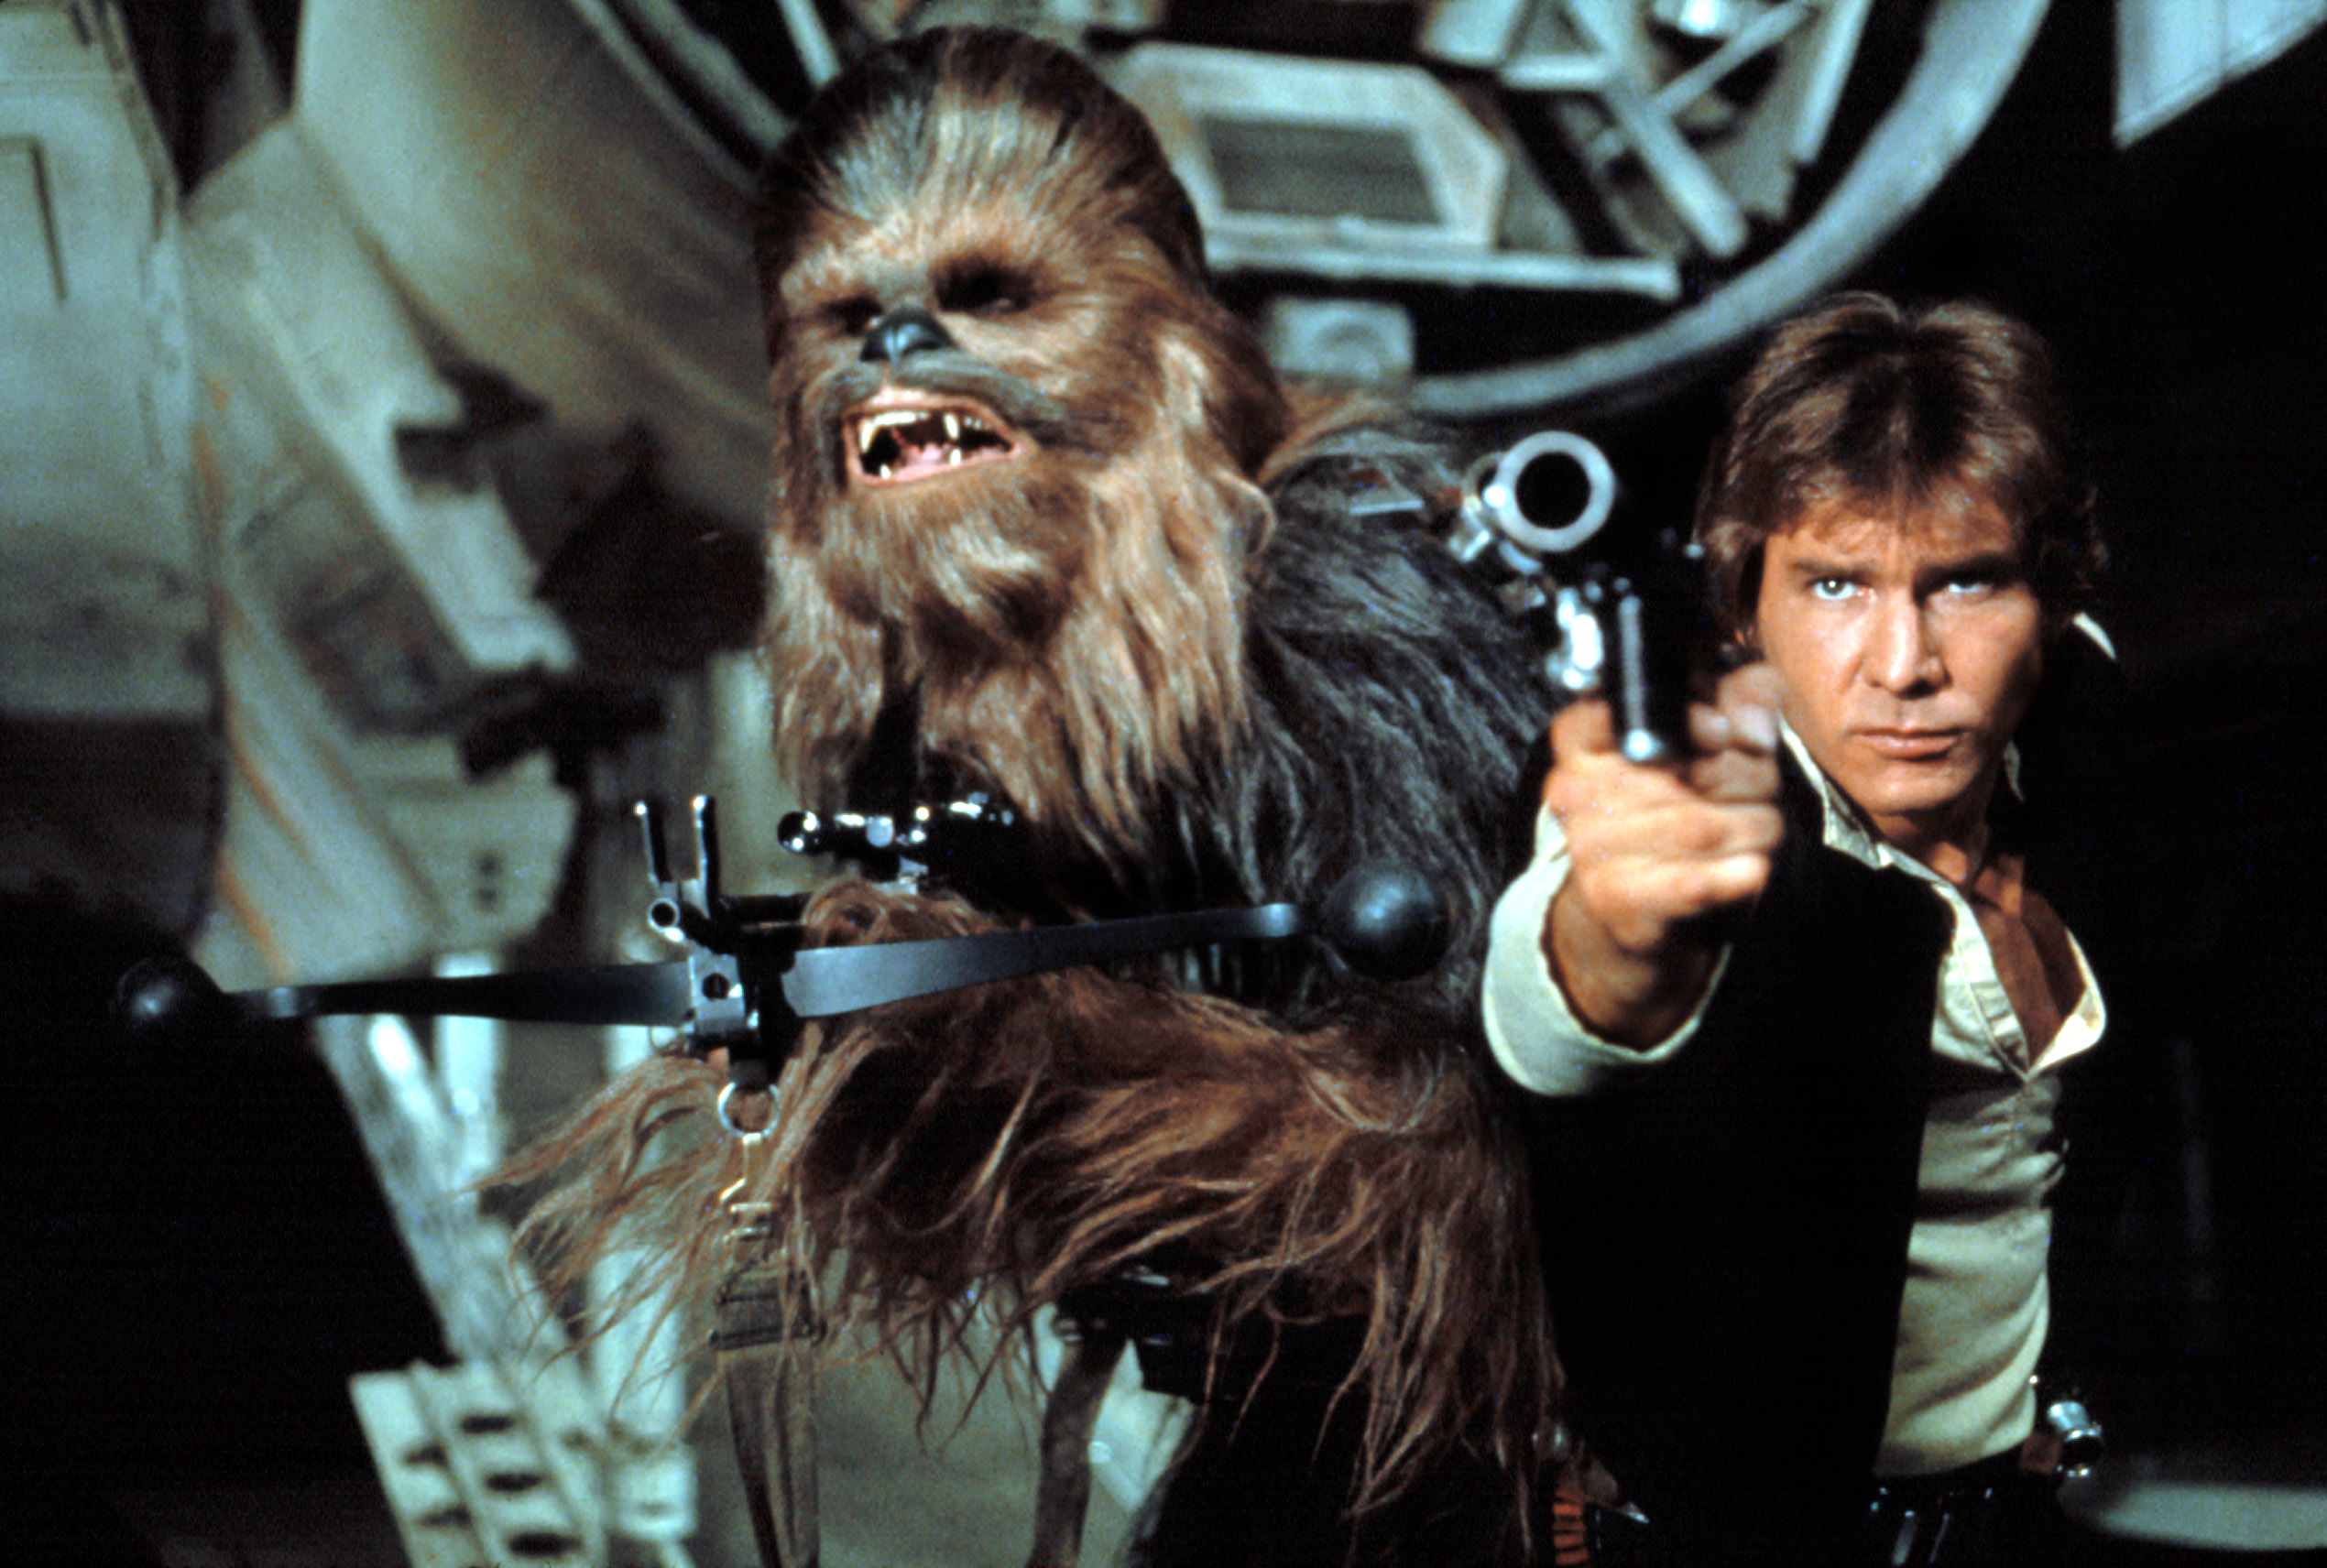 han pointing a gun while standing next to chewbaca